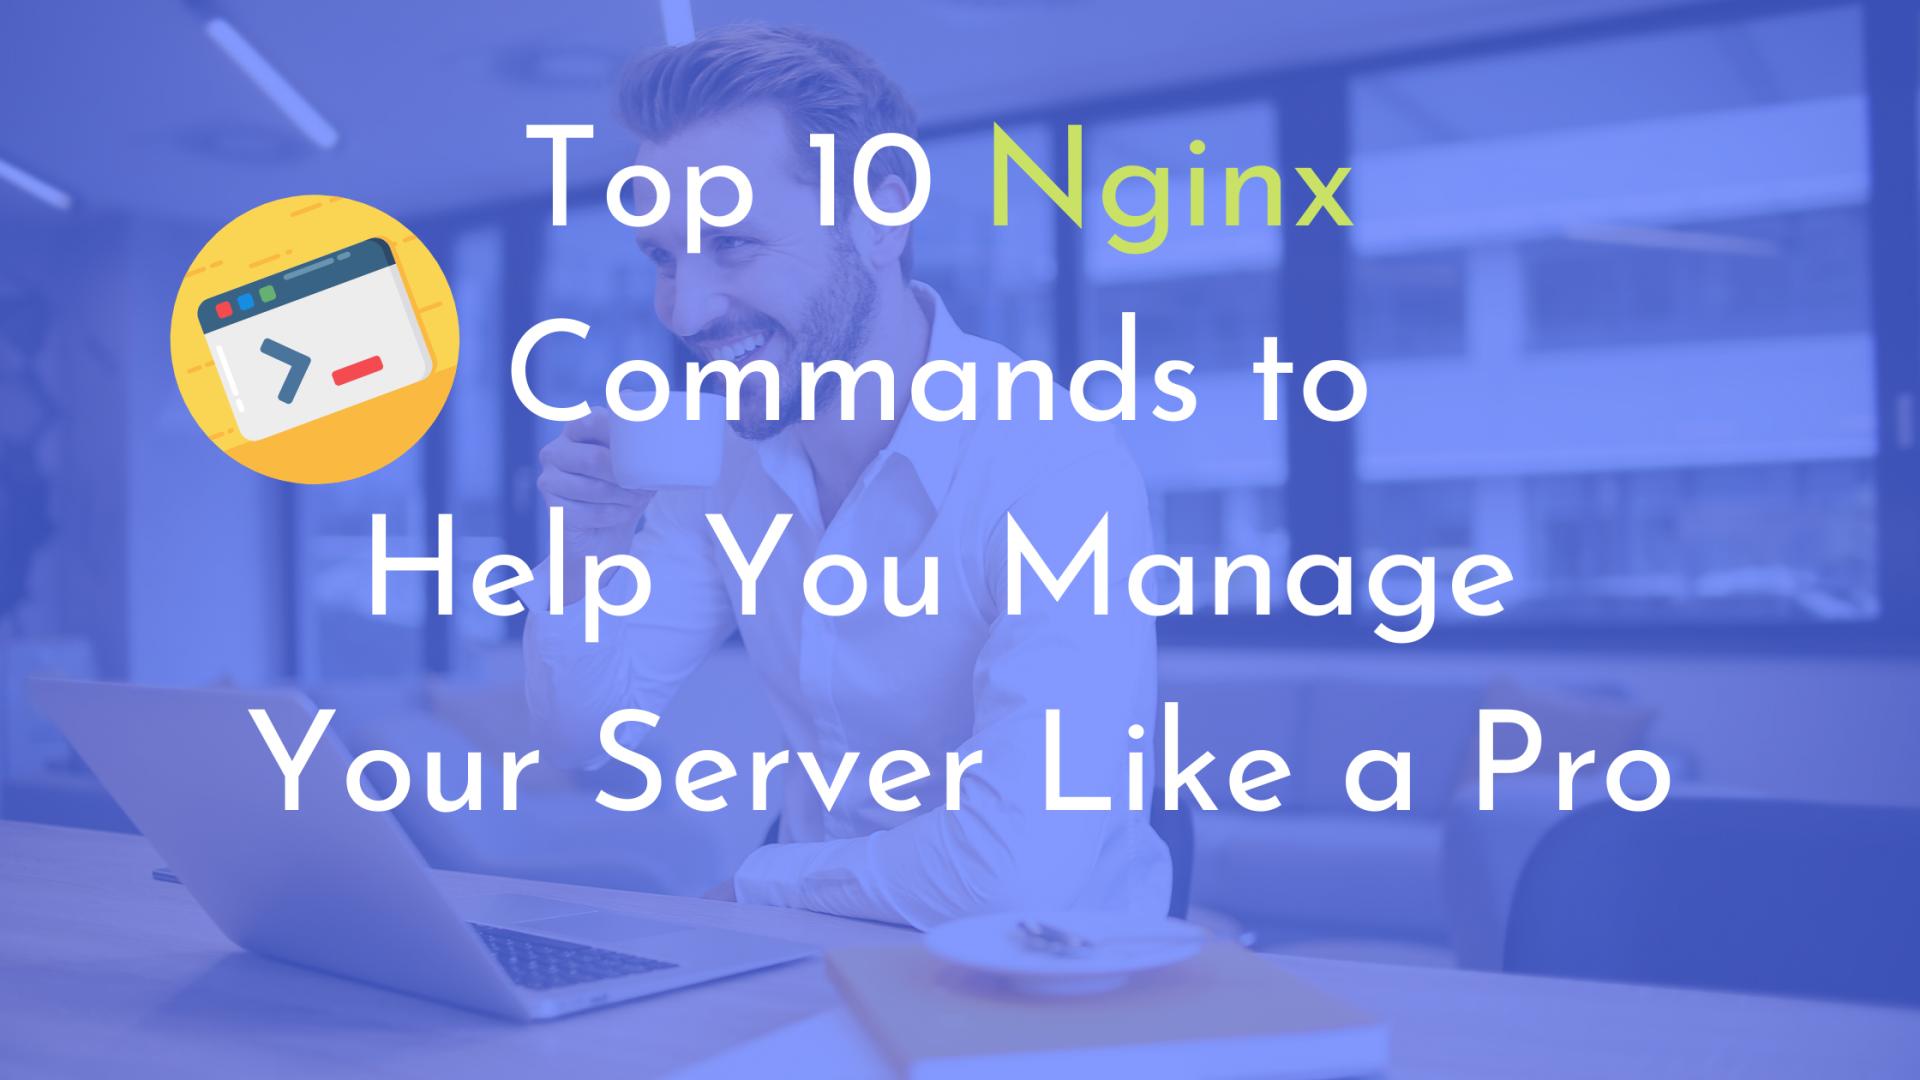 Top 10 Nginx Commands to Help You Manage Your Server Like a Pro